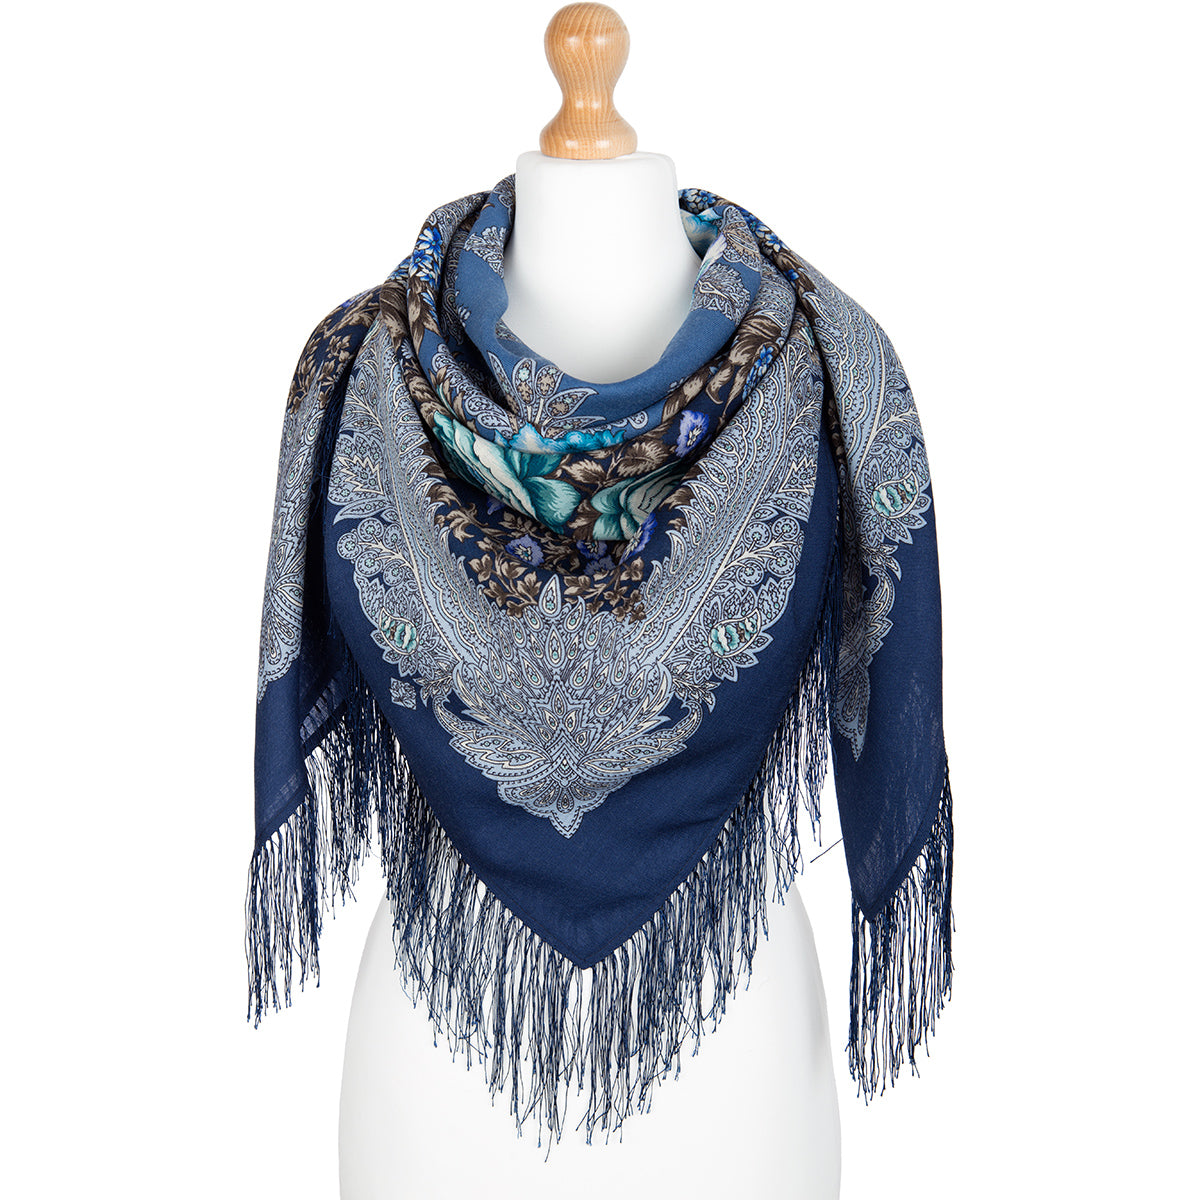 Shawl  "On the Crest of a Wave"